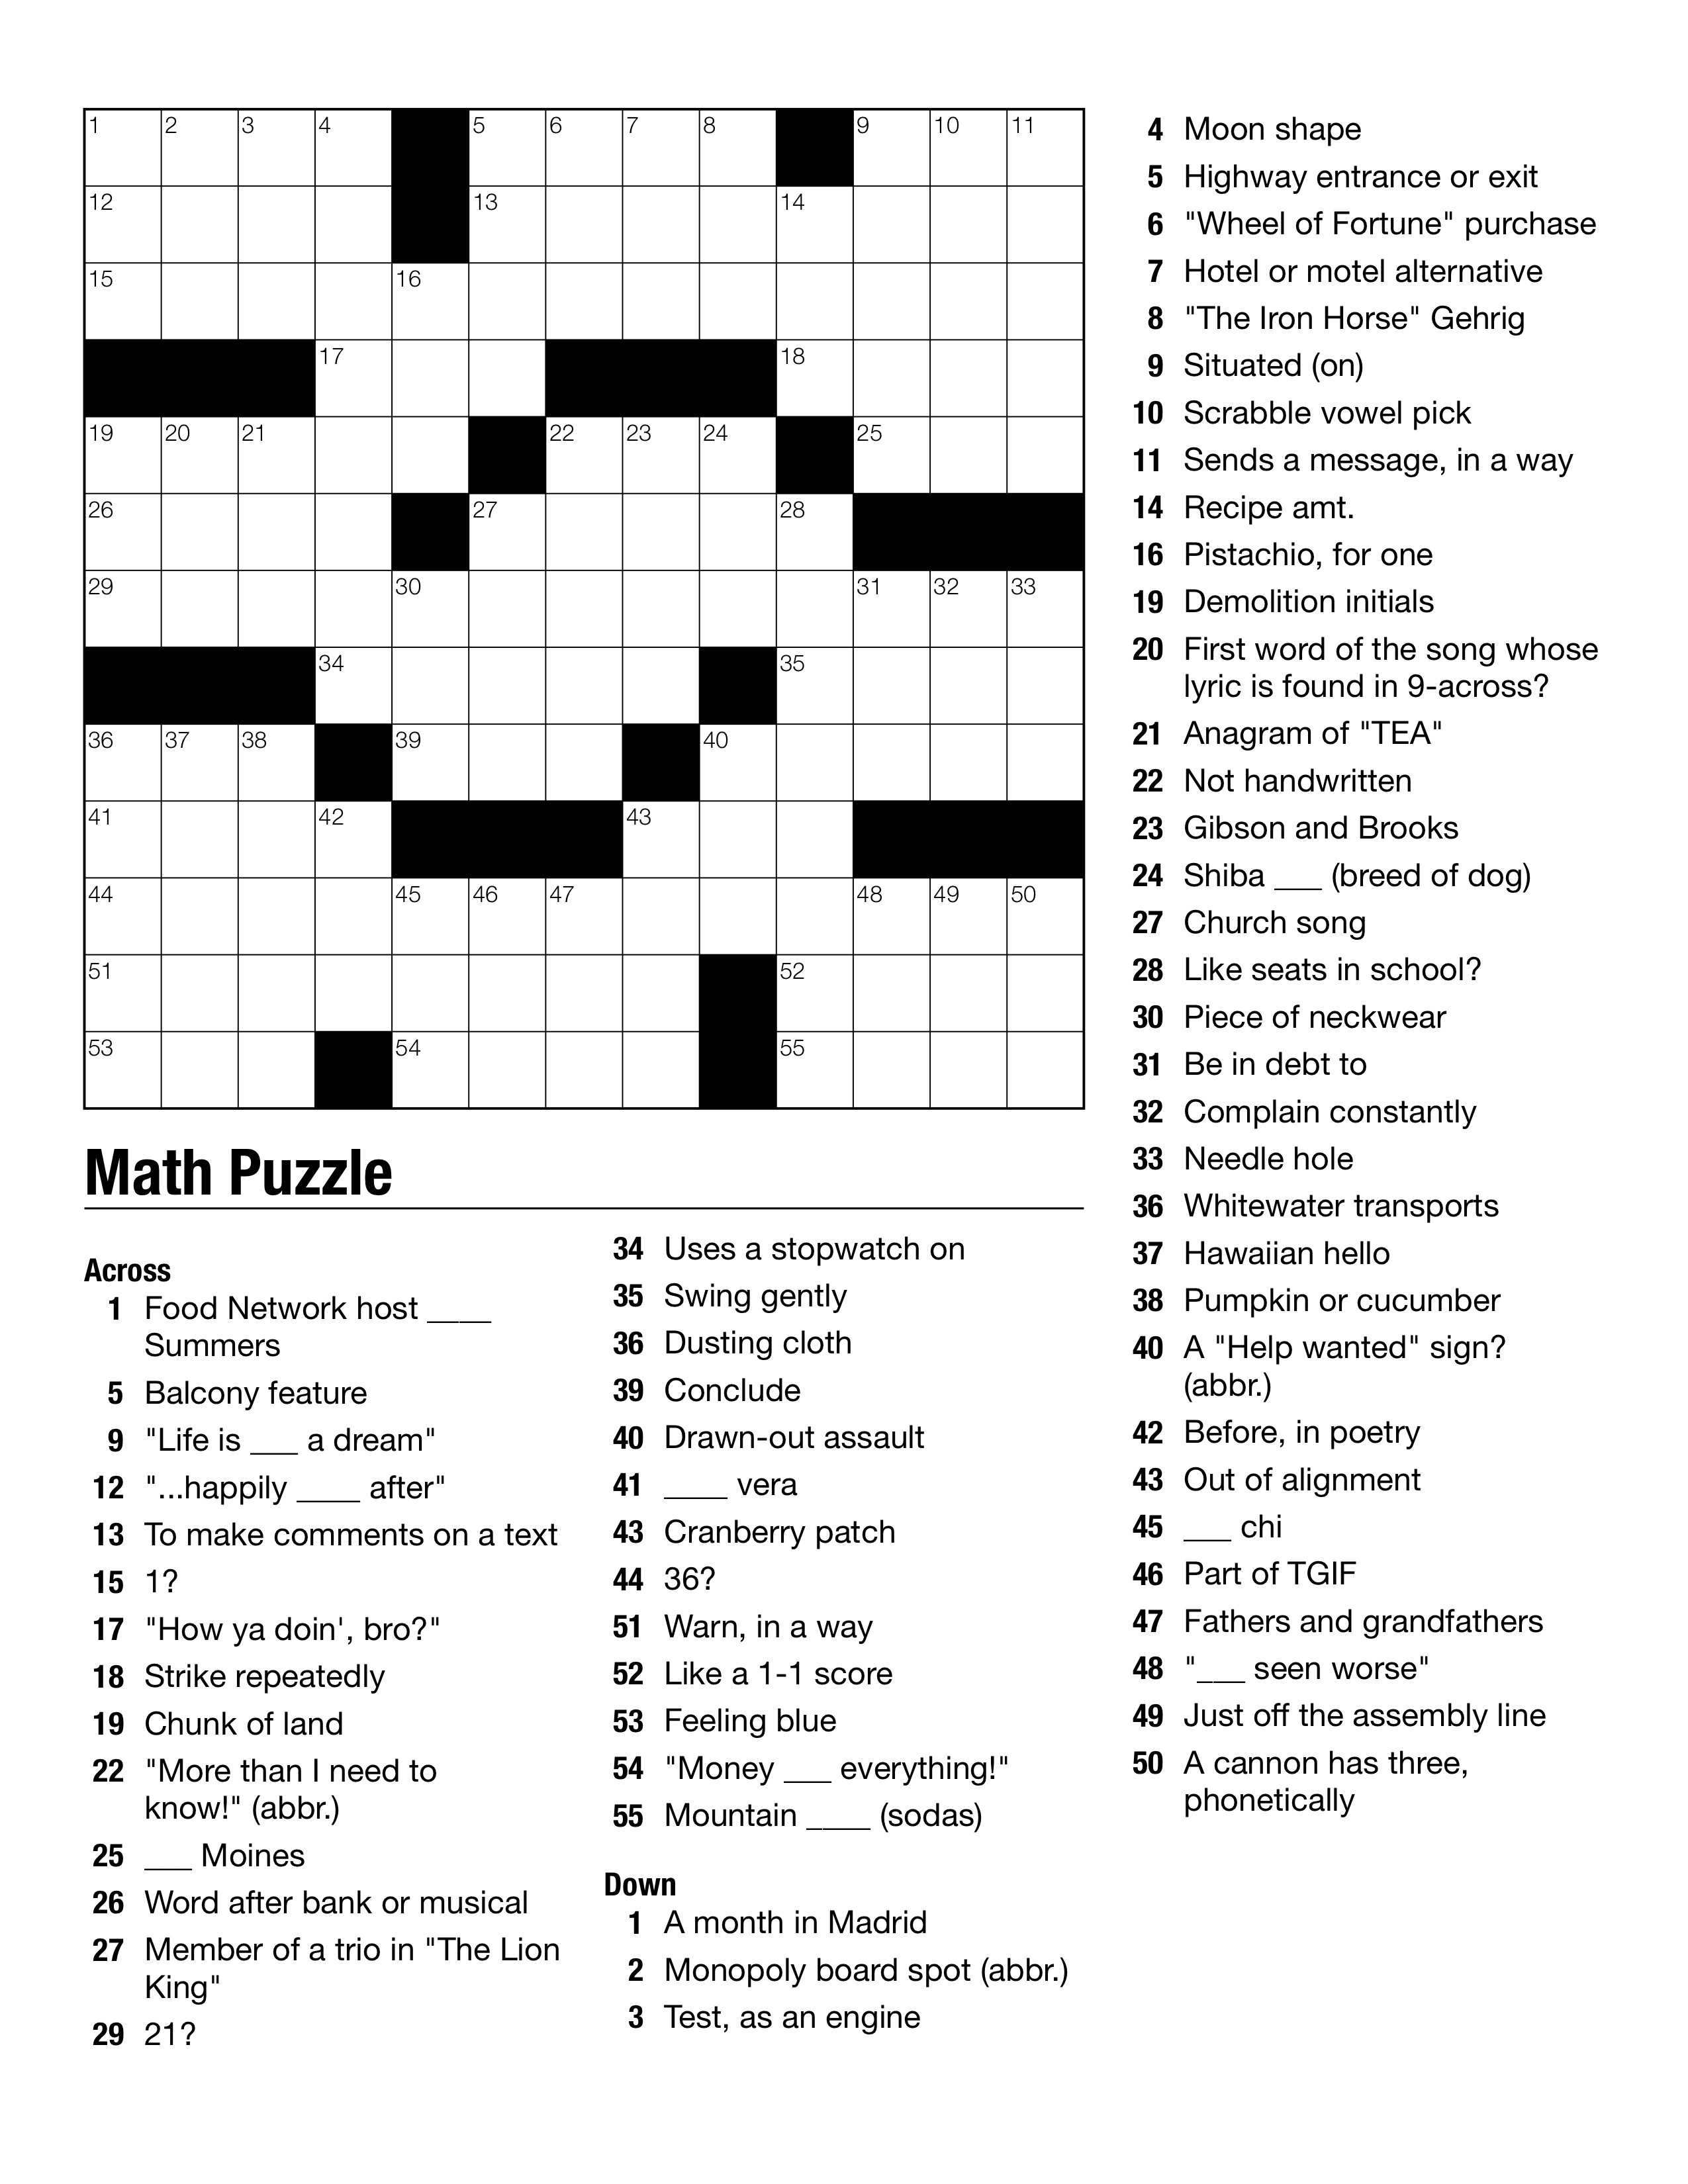 weekly themed crossword bvnwnews printable crosswords about